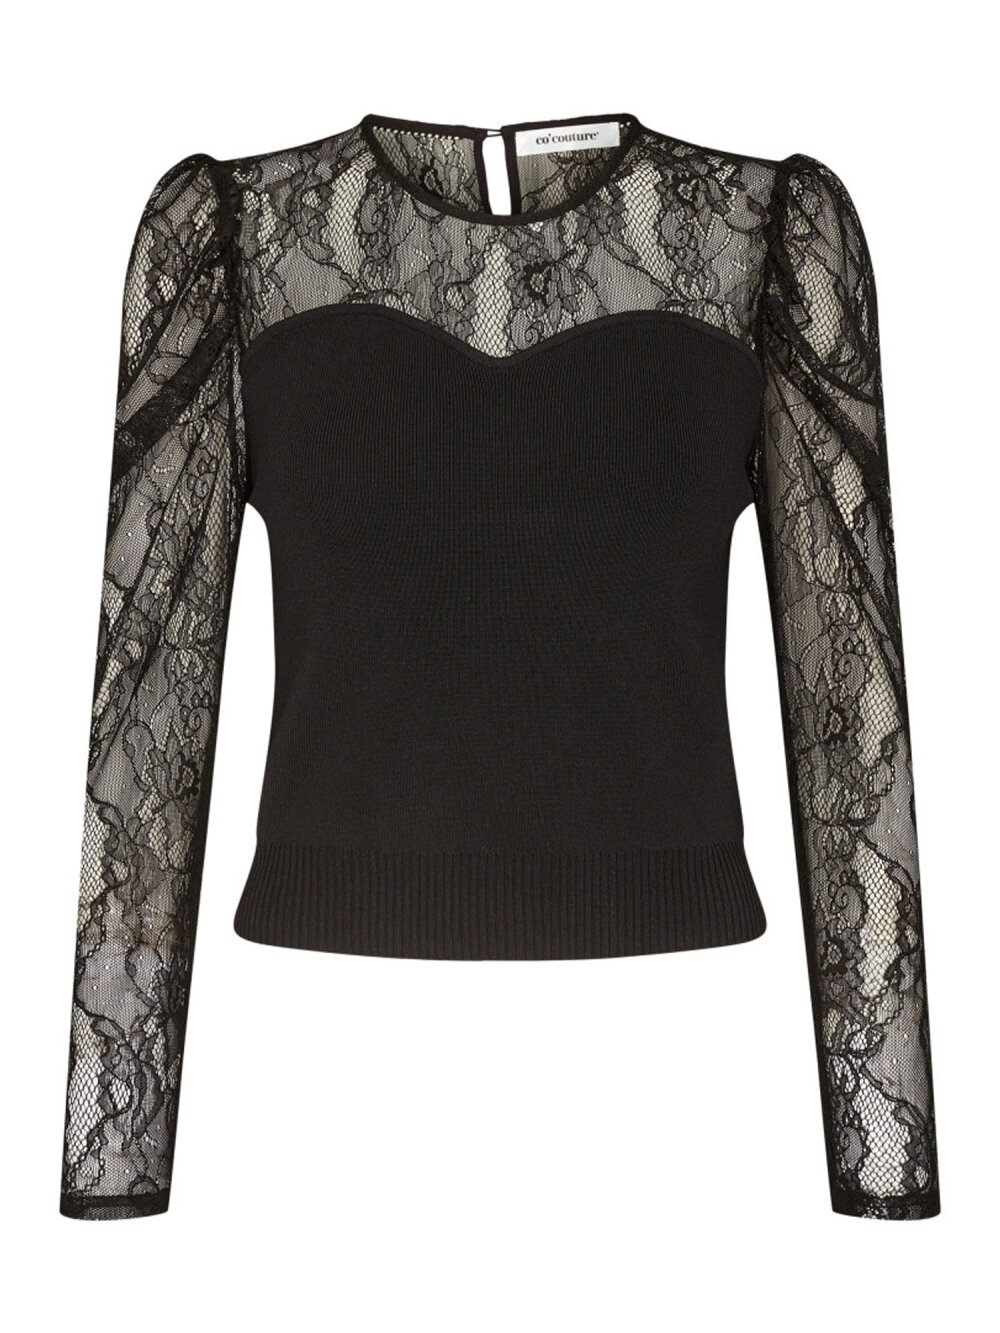 Co´Couture - Leena Lace Mix Bluse